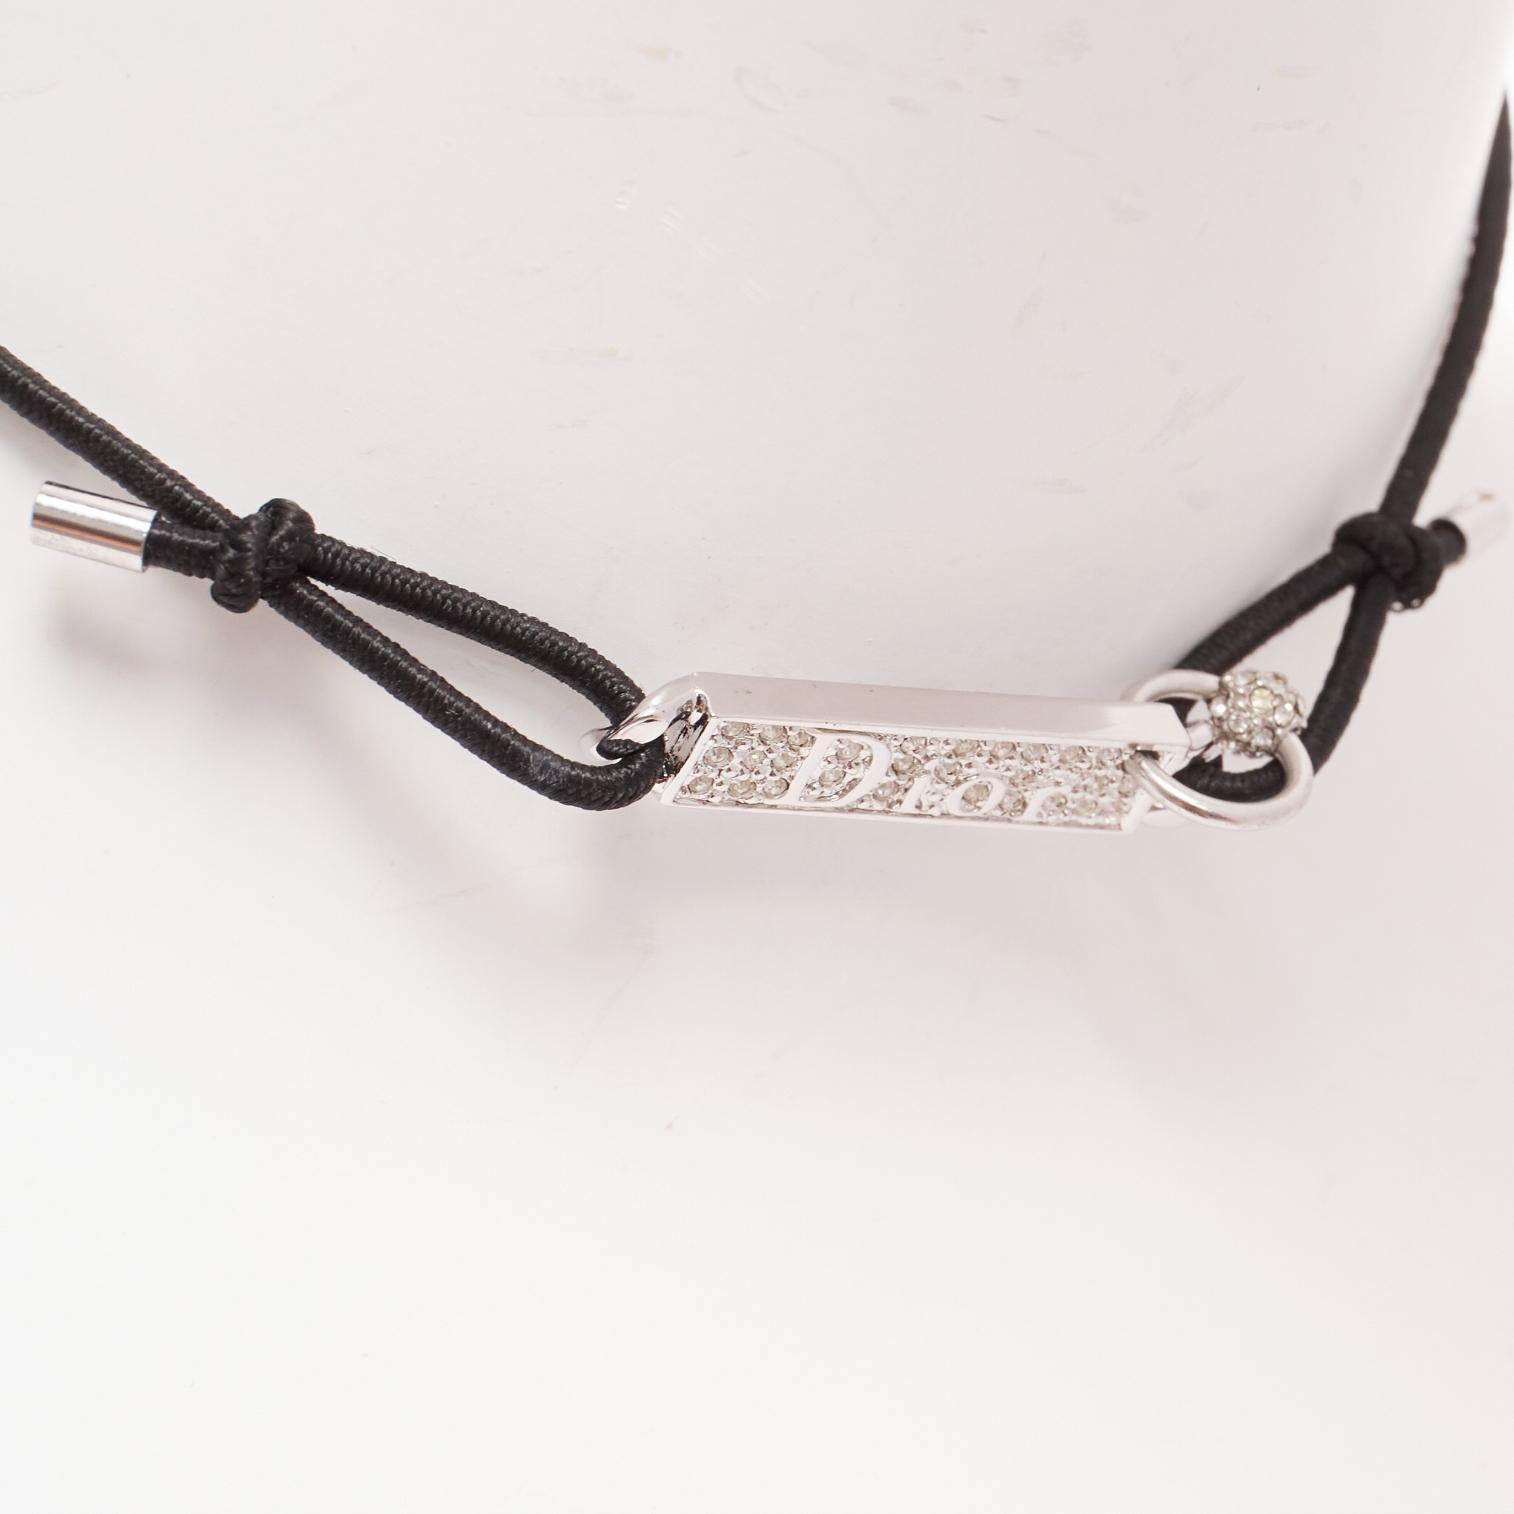 rare CHRISTIAN DIOR John Galliano Vintage silver plated crystal logo tag choker
Reference: TGAS/D01137
Brand: Dior
Designer: John Galliano
Material: Metal
Color: Silver, Black
Pattern: Crystals
Closure: Lobster Clasp
Lining: Black Fabric
Extra